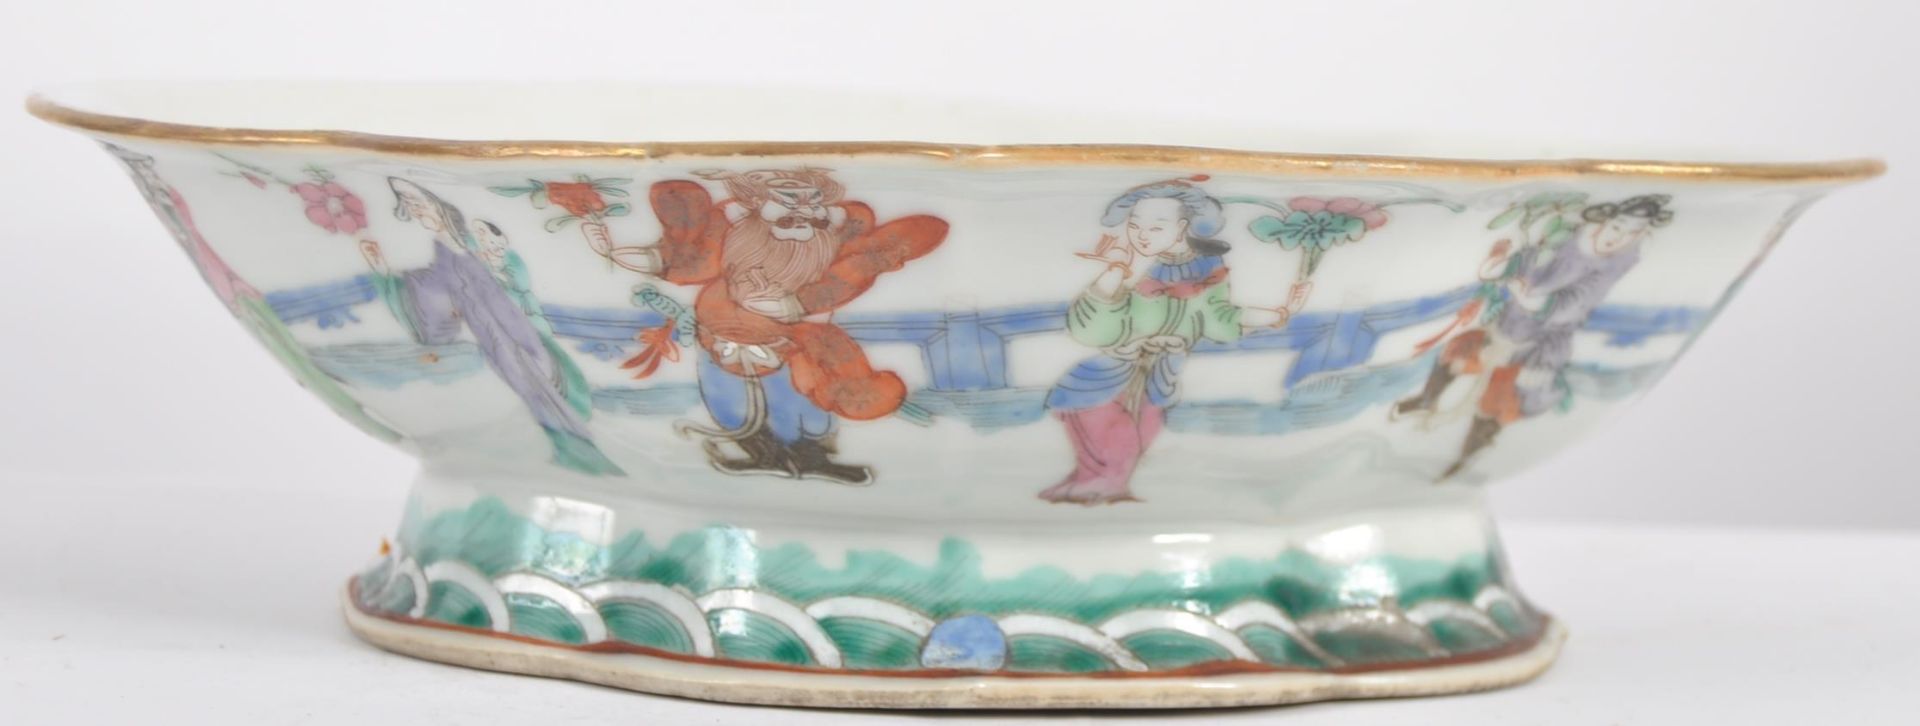 19TH CENTURY CHINESE OFFERING BOWL - Image 3 of 5